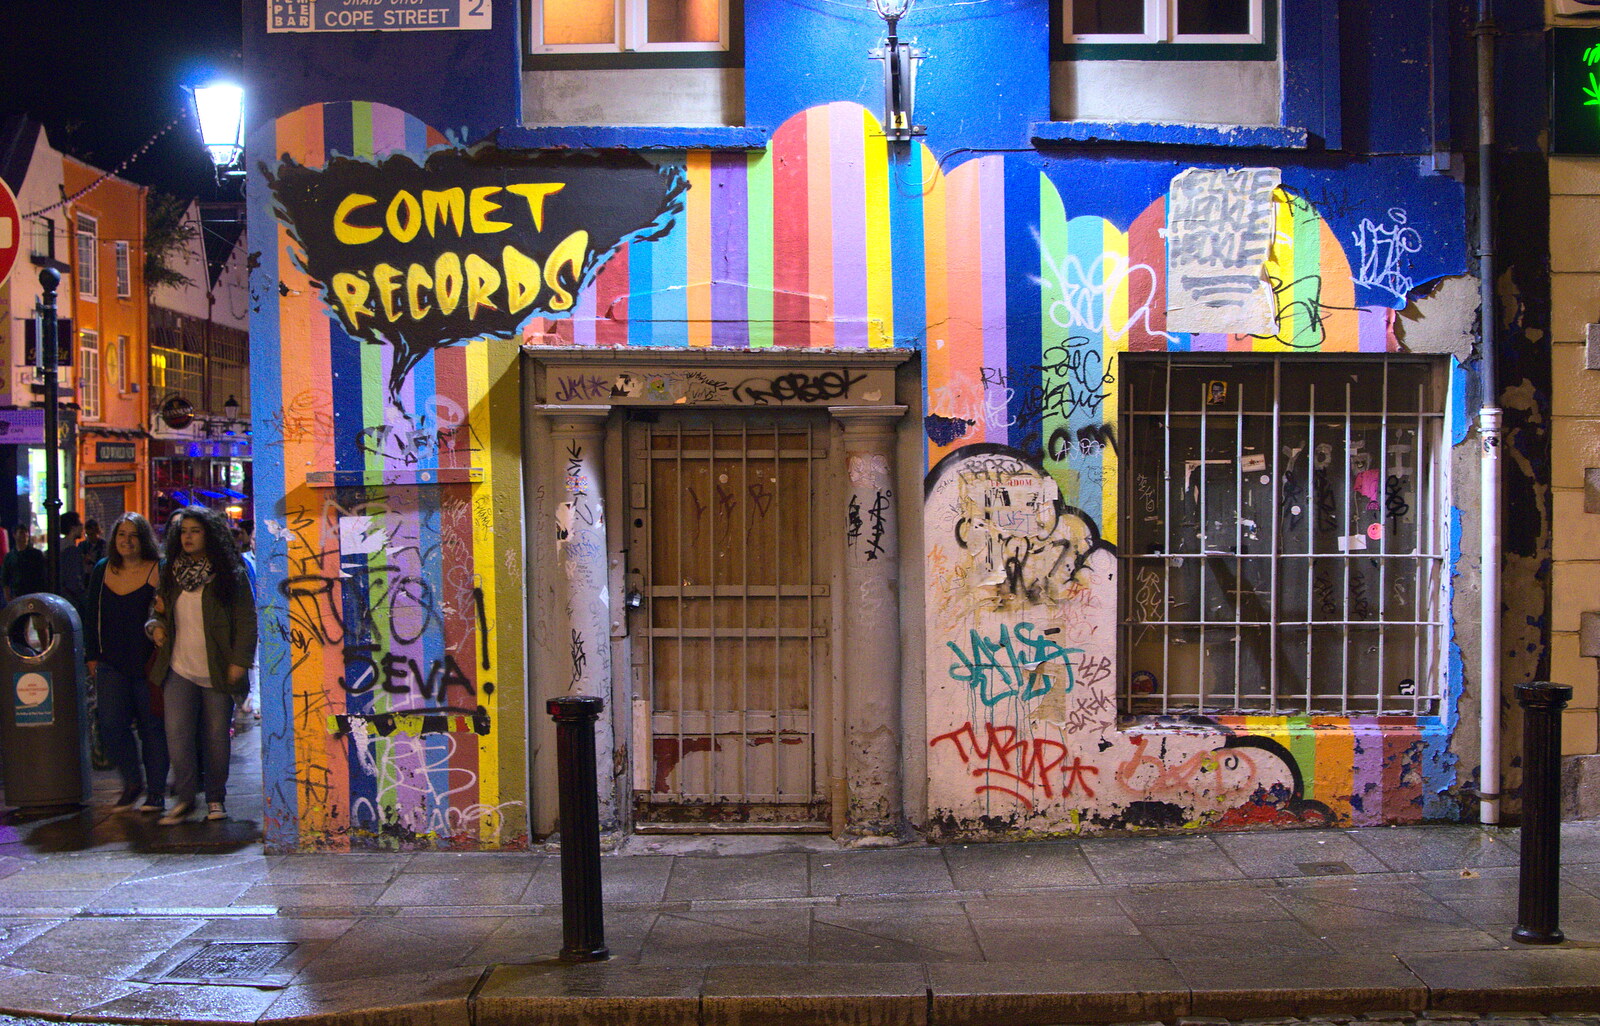 Comet Records on Cope Street from A Night Out in Dublin, County Dublin, Ireland - 9th August 2014